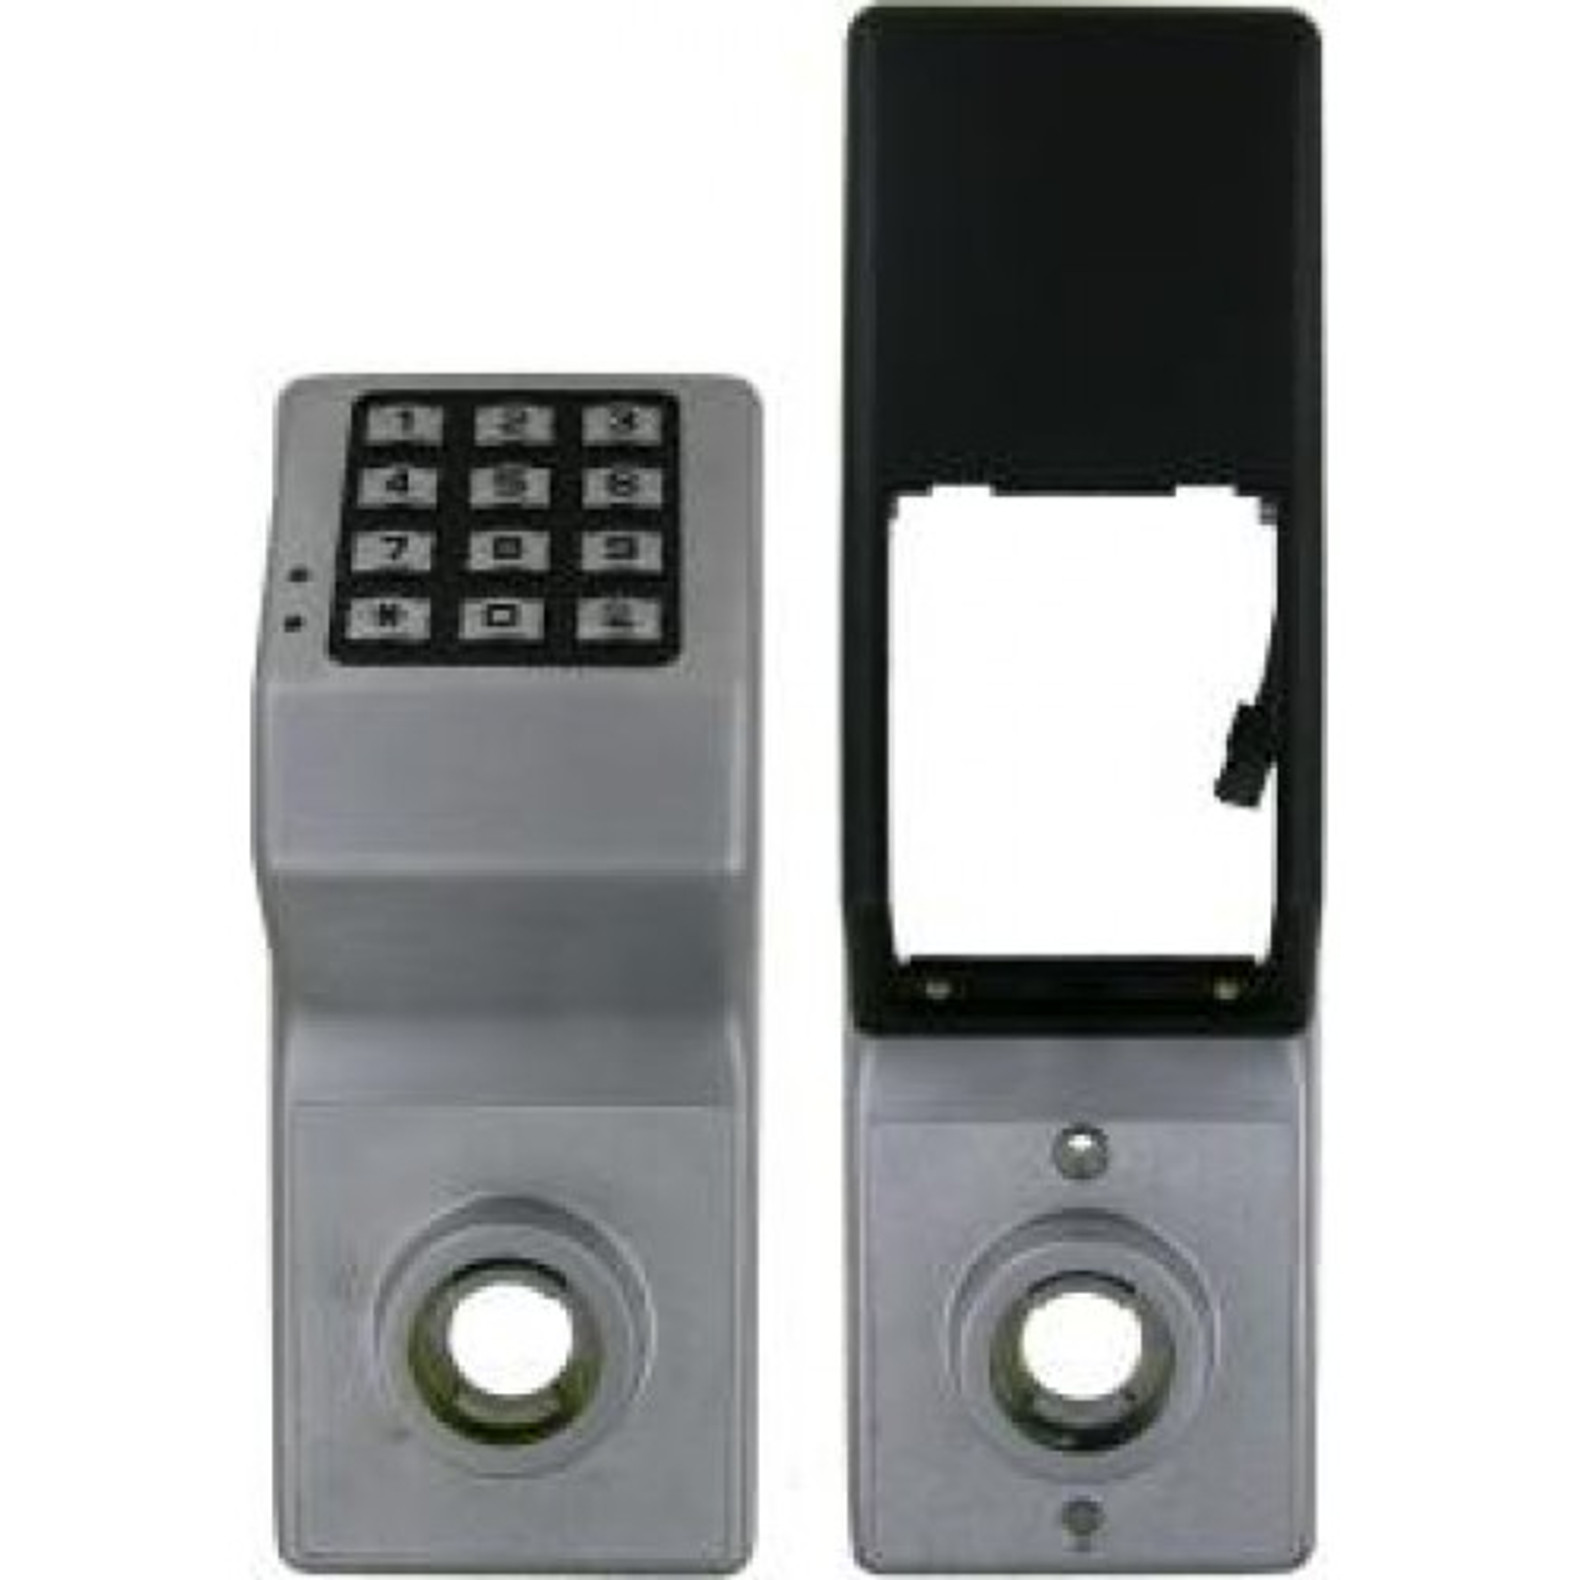 Alarm Lock DL610026DUPGRD Networx Dl6100 Upgrade Kit Includes Outside  Housing and Inside Housing in Satin Chrome KAL DOOR HARDWARE